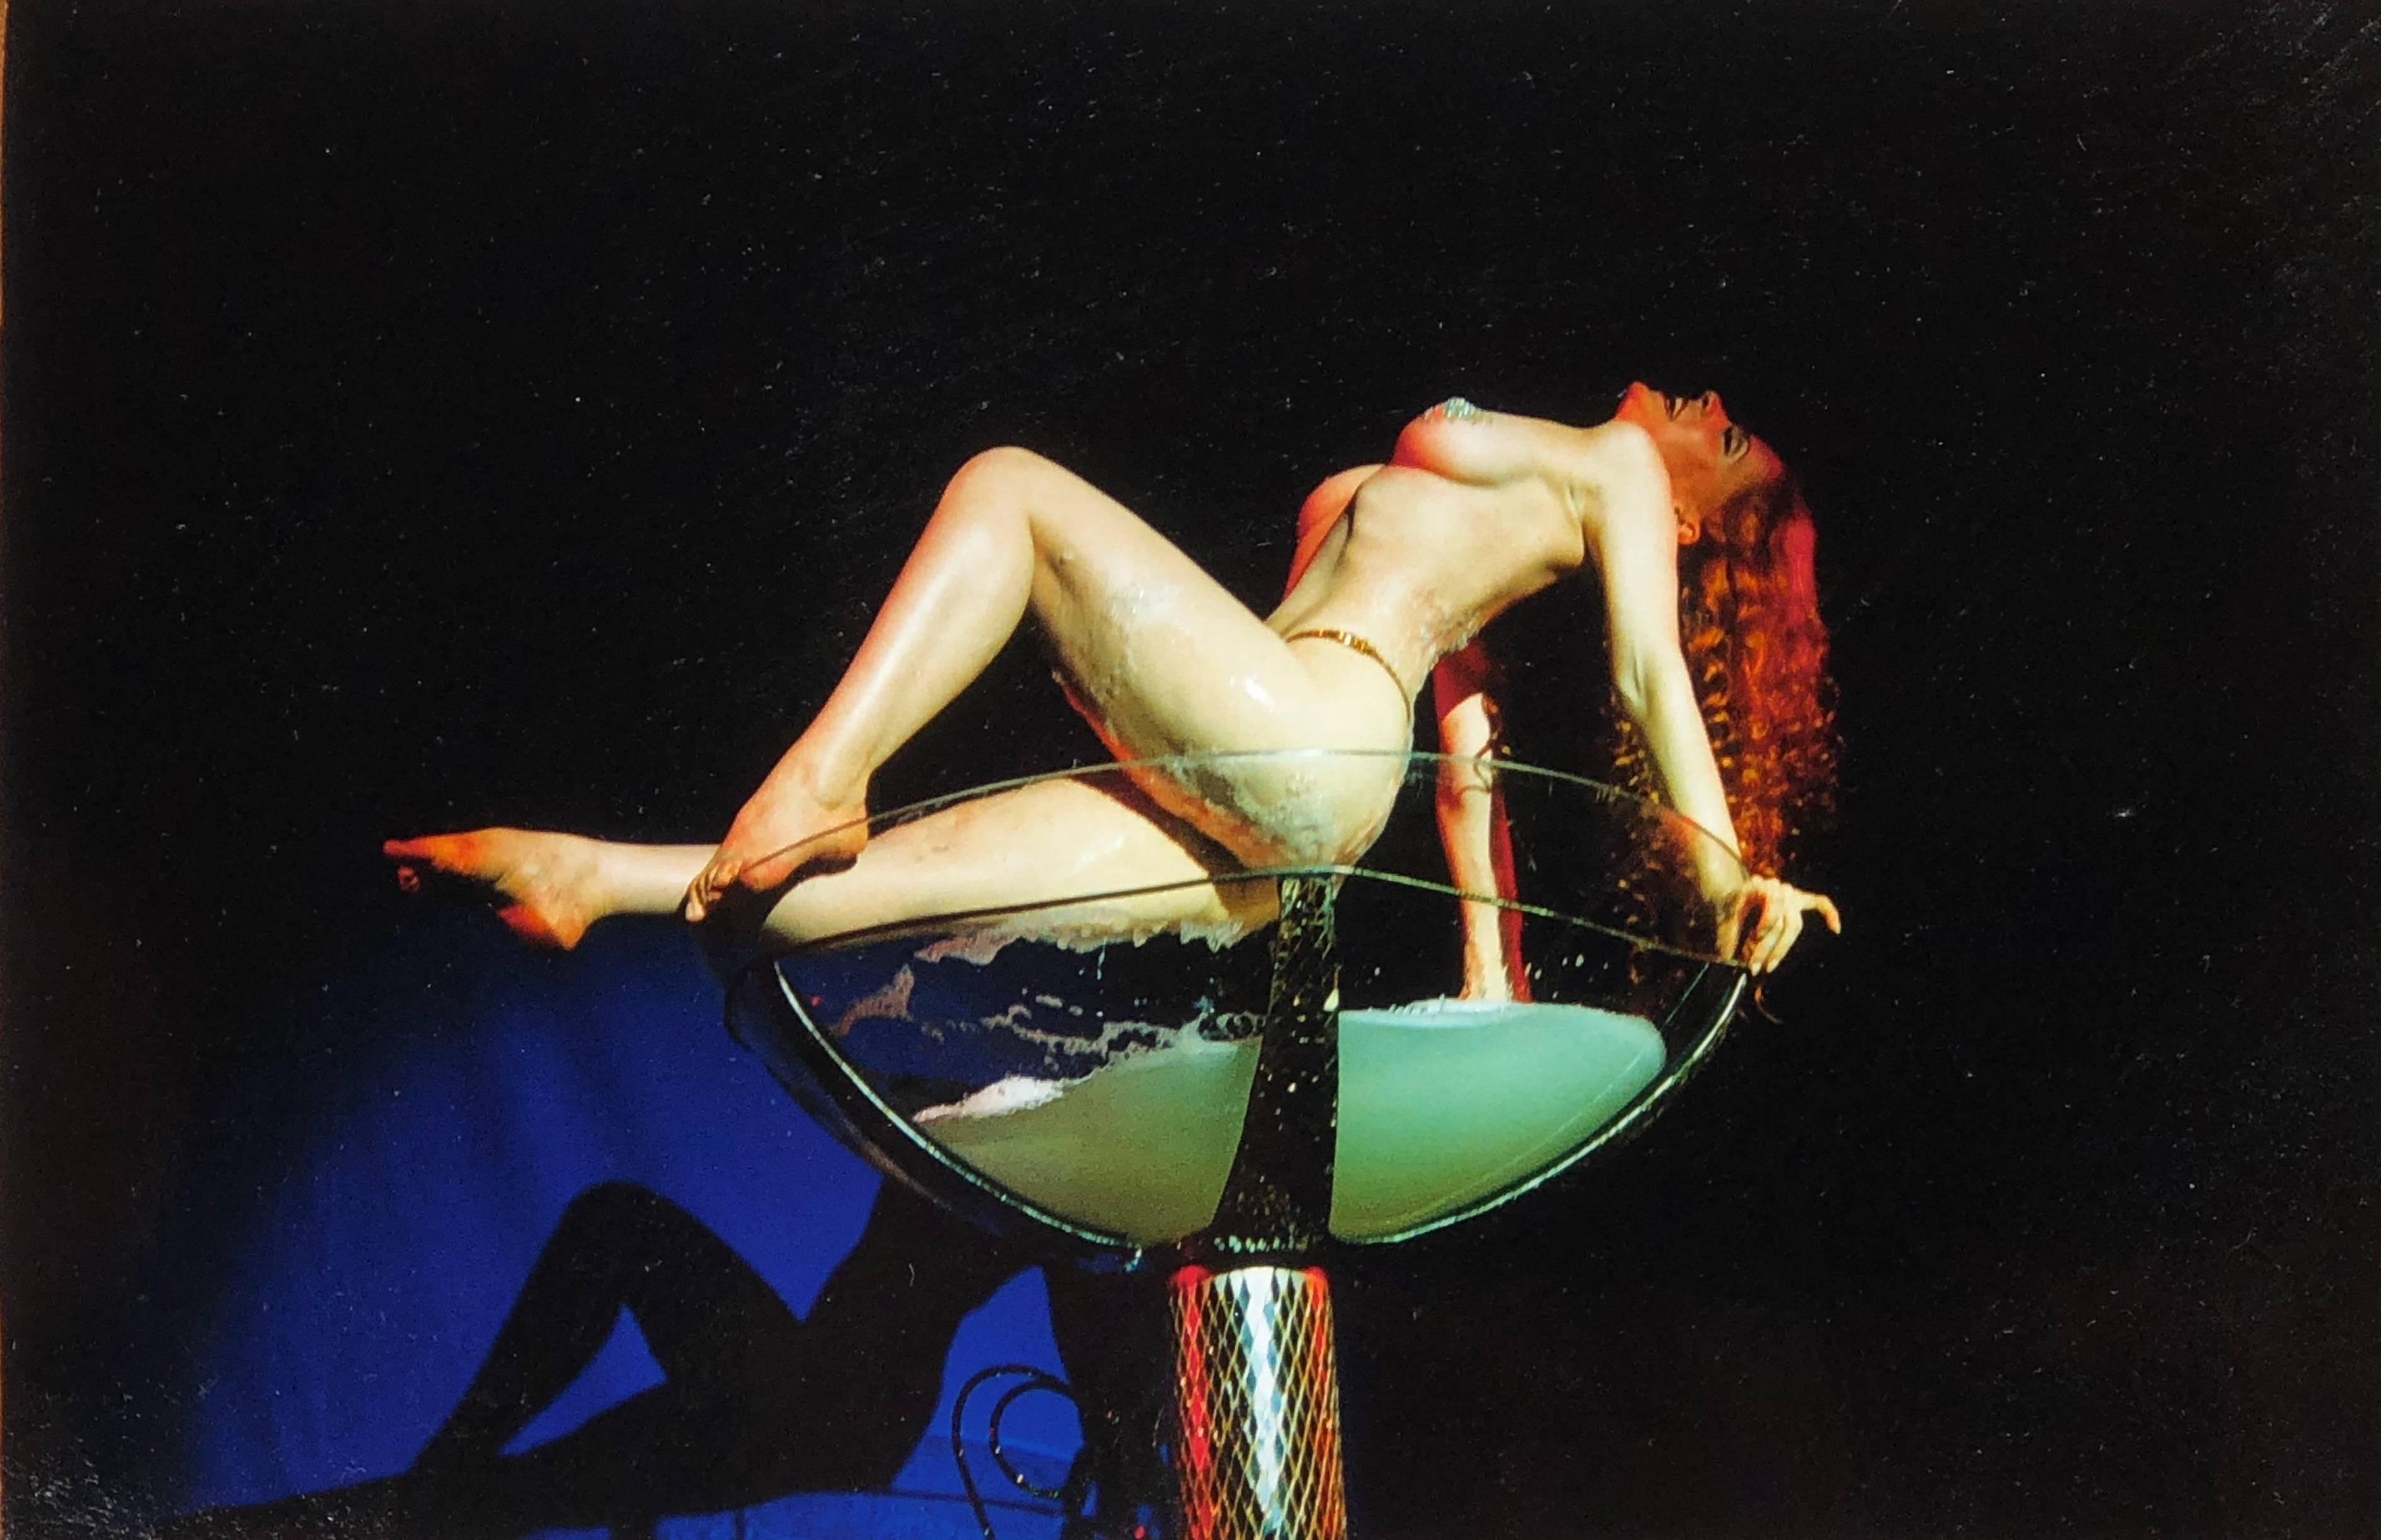 Richard Heeps Color Photograph - Burlesque Series, Catherine D'Lish in Champagne Coupe II Tease-O-Rama, Hollywood